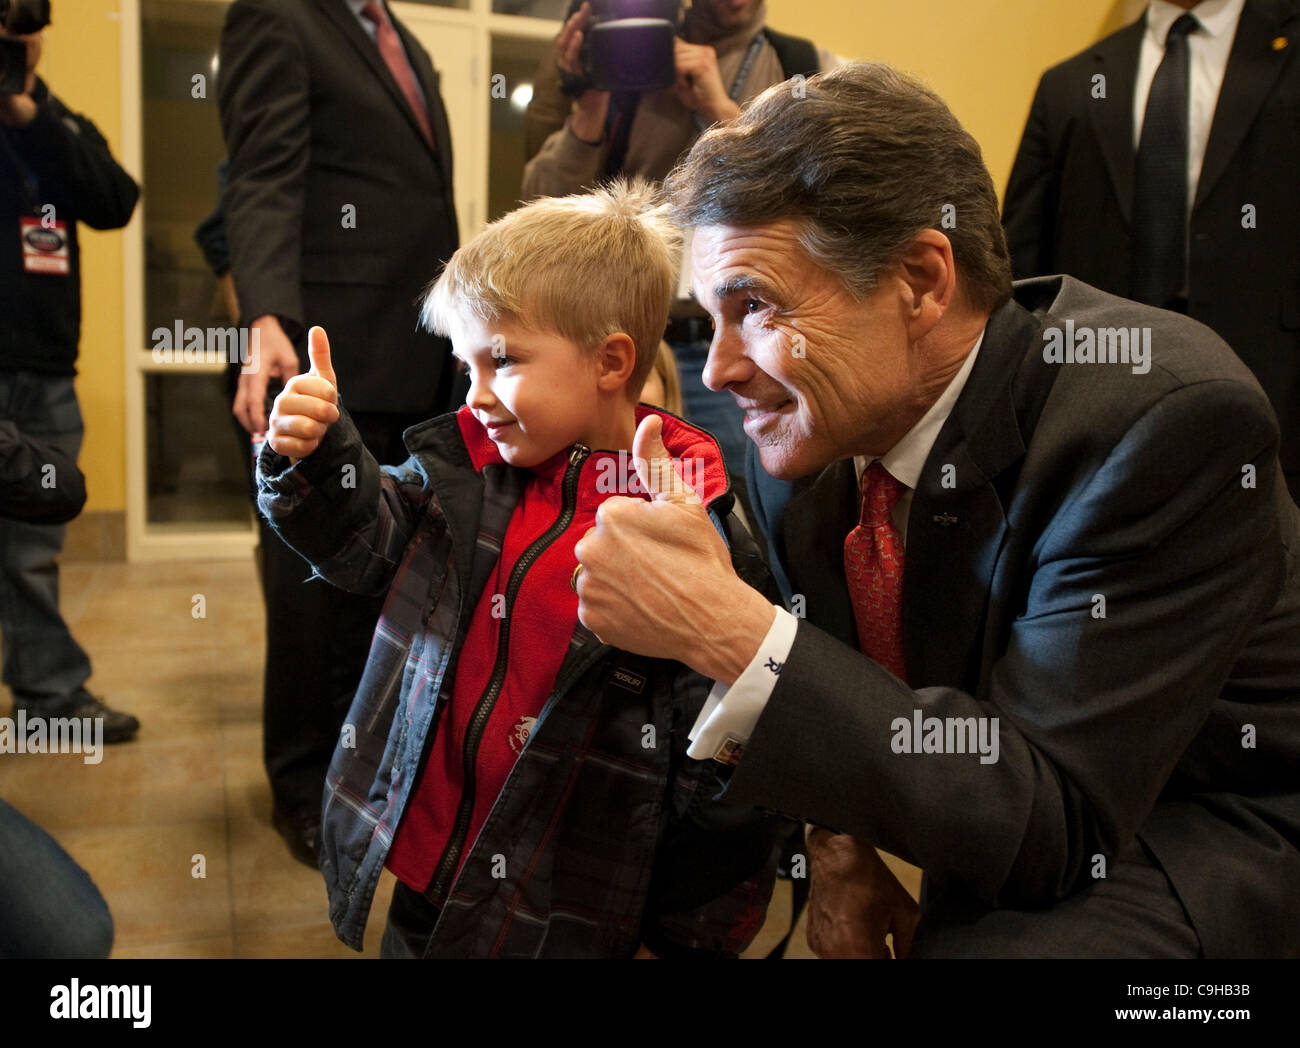 Republican presidential nominee candidate Rick Perry poses with young boy at an Iowa caucus prior to the voting in January 2012 Stock Photo